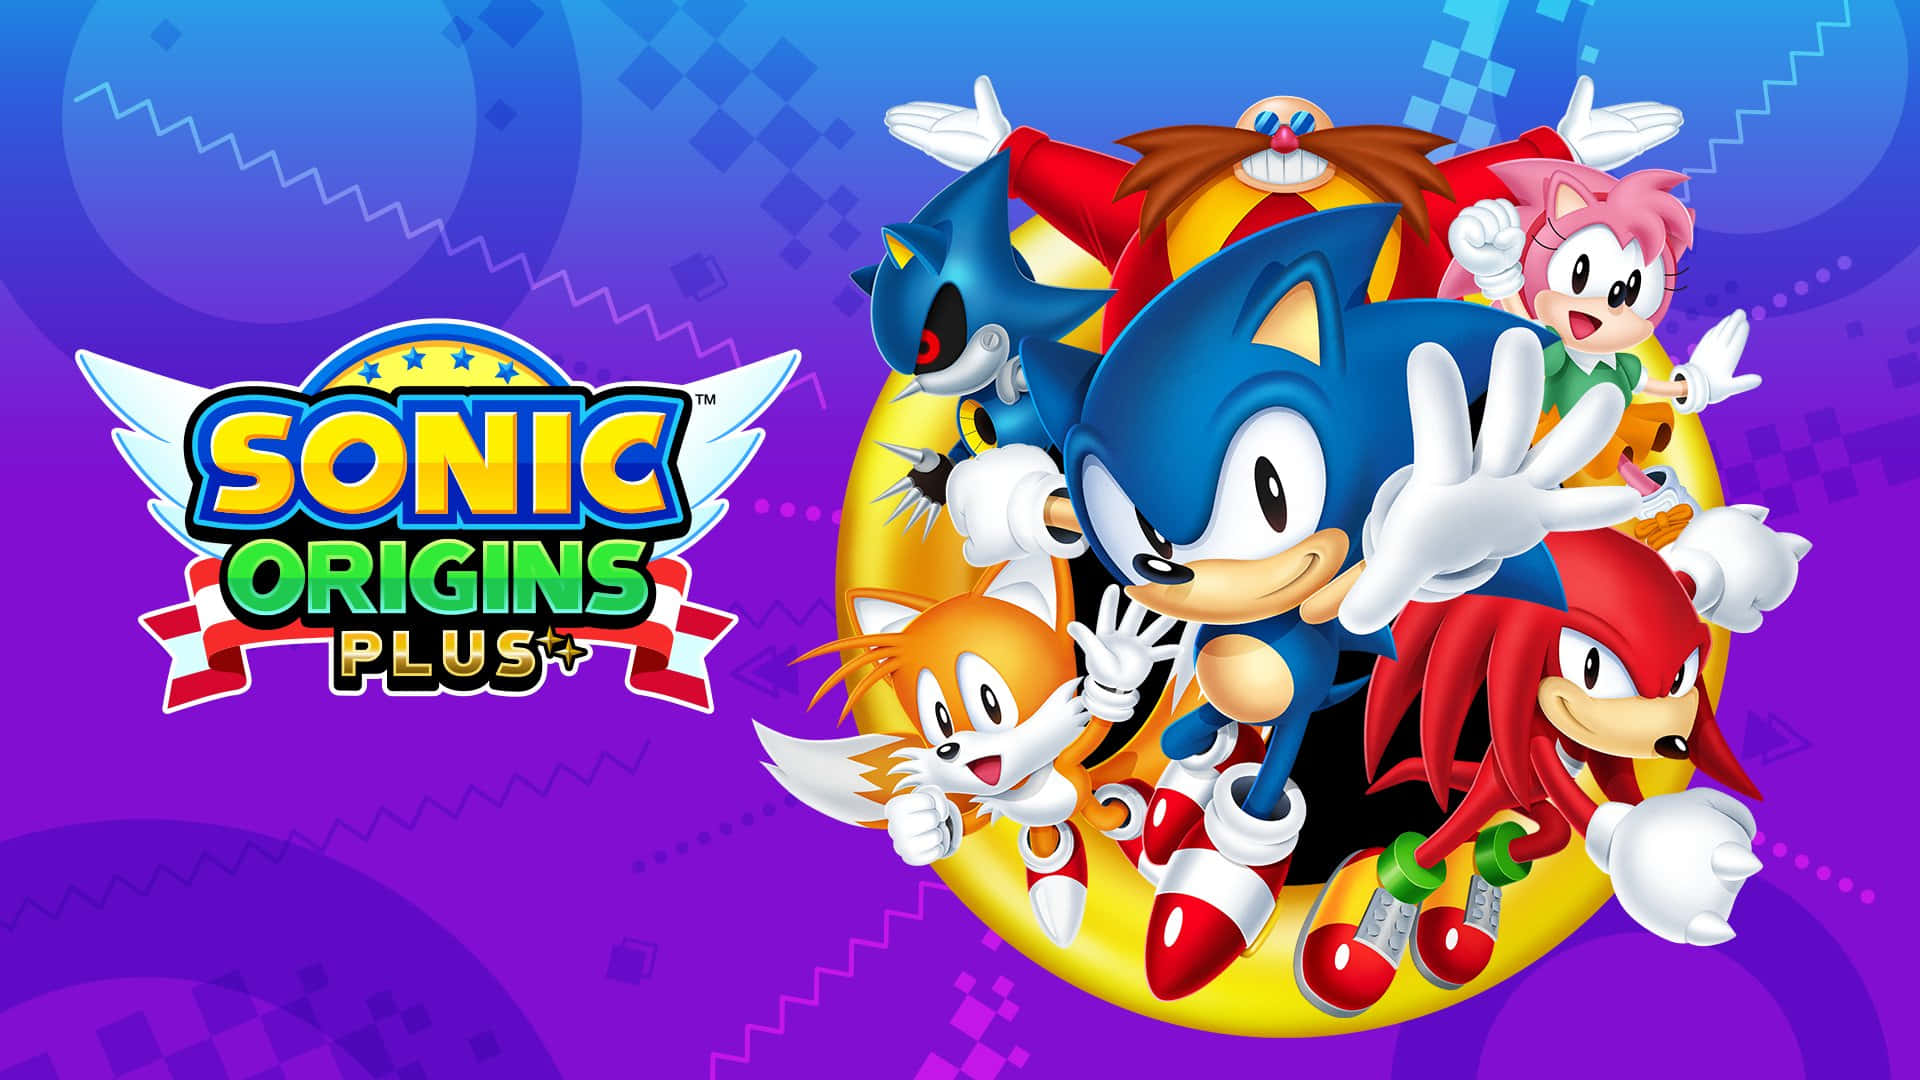 Classic Sonic the Hedgehog Racing Through the Green Hill Zone Wallpaper